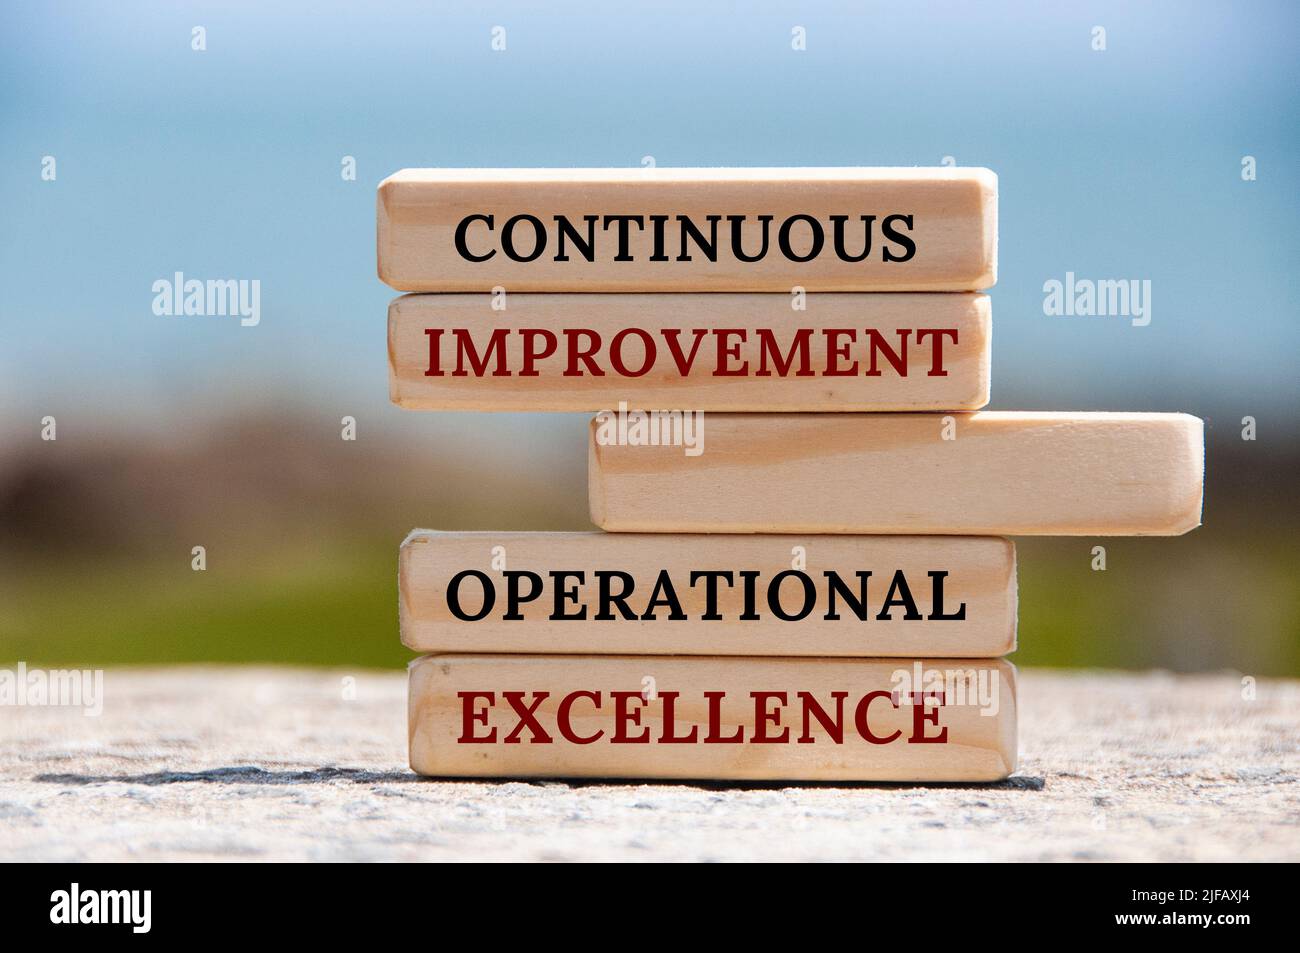 Continuous improvement Operational excellence text on wooden blocks with blurred nature background. Business concept Stock Photo